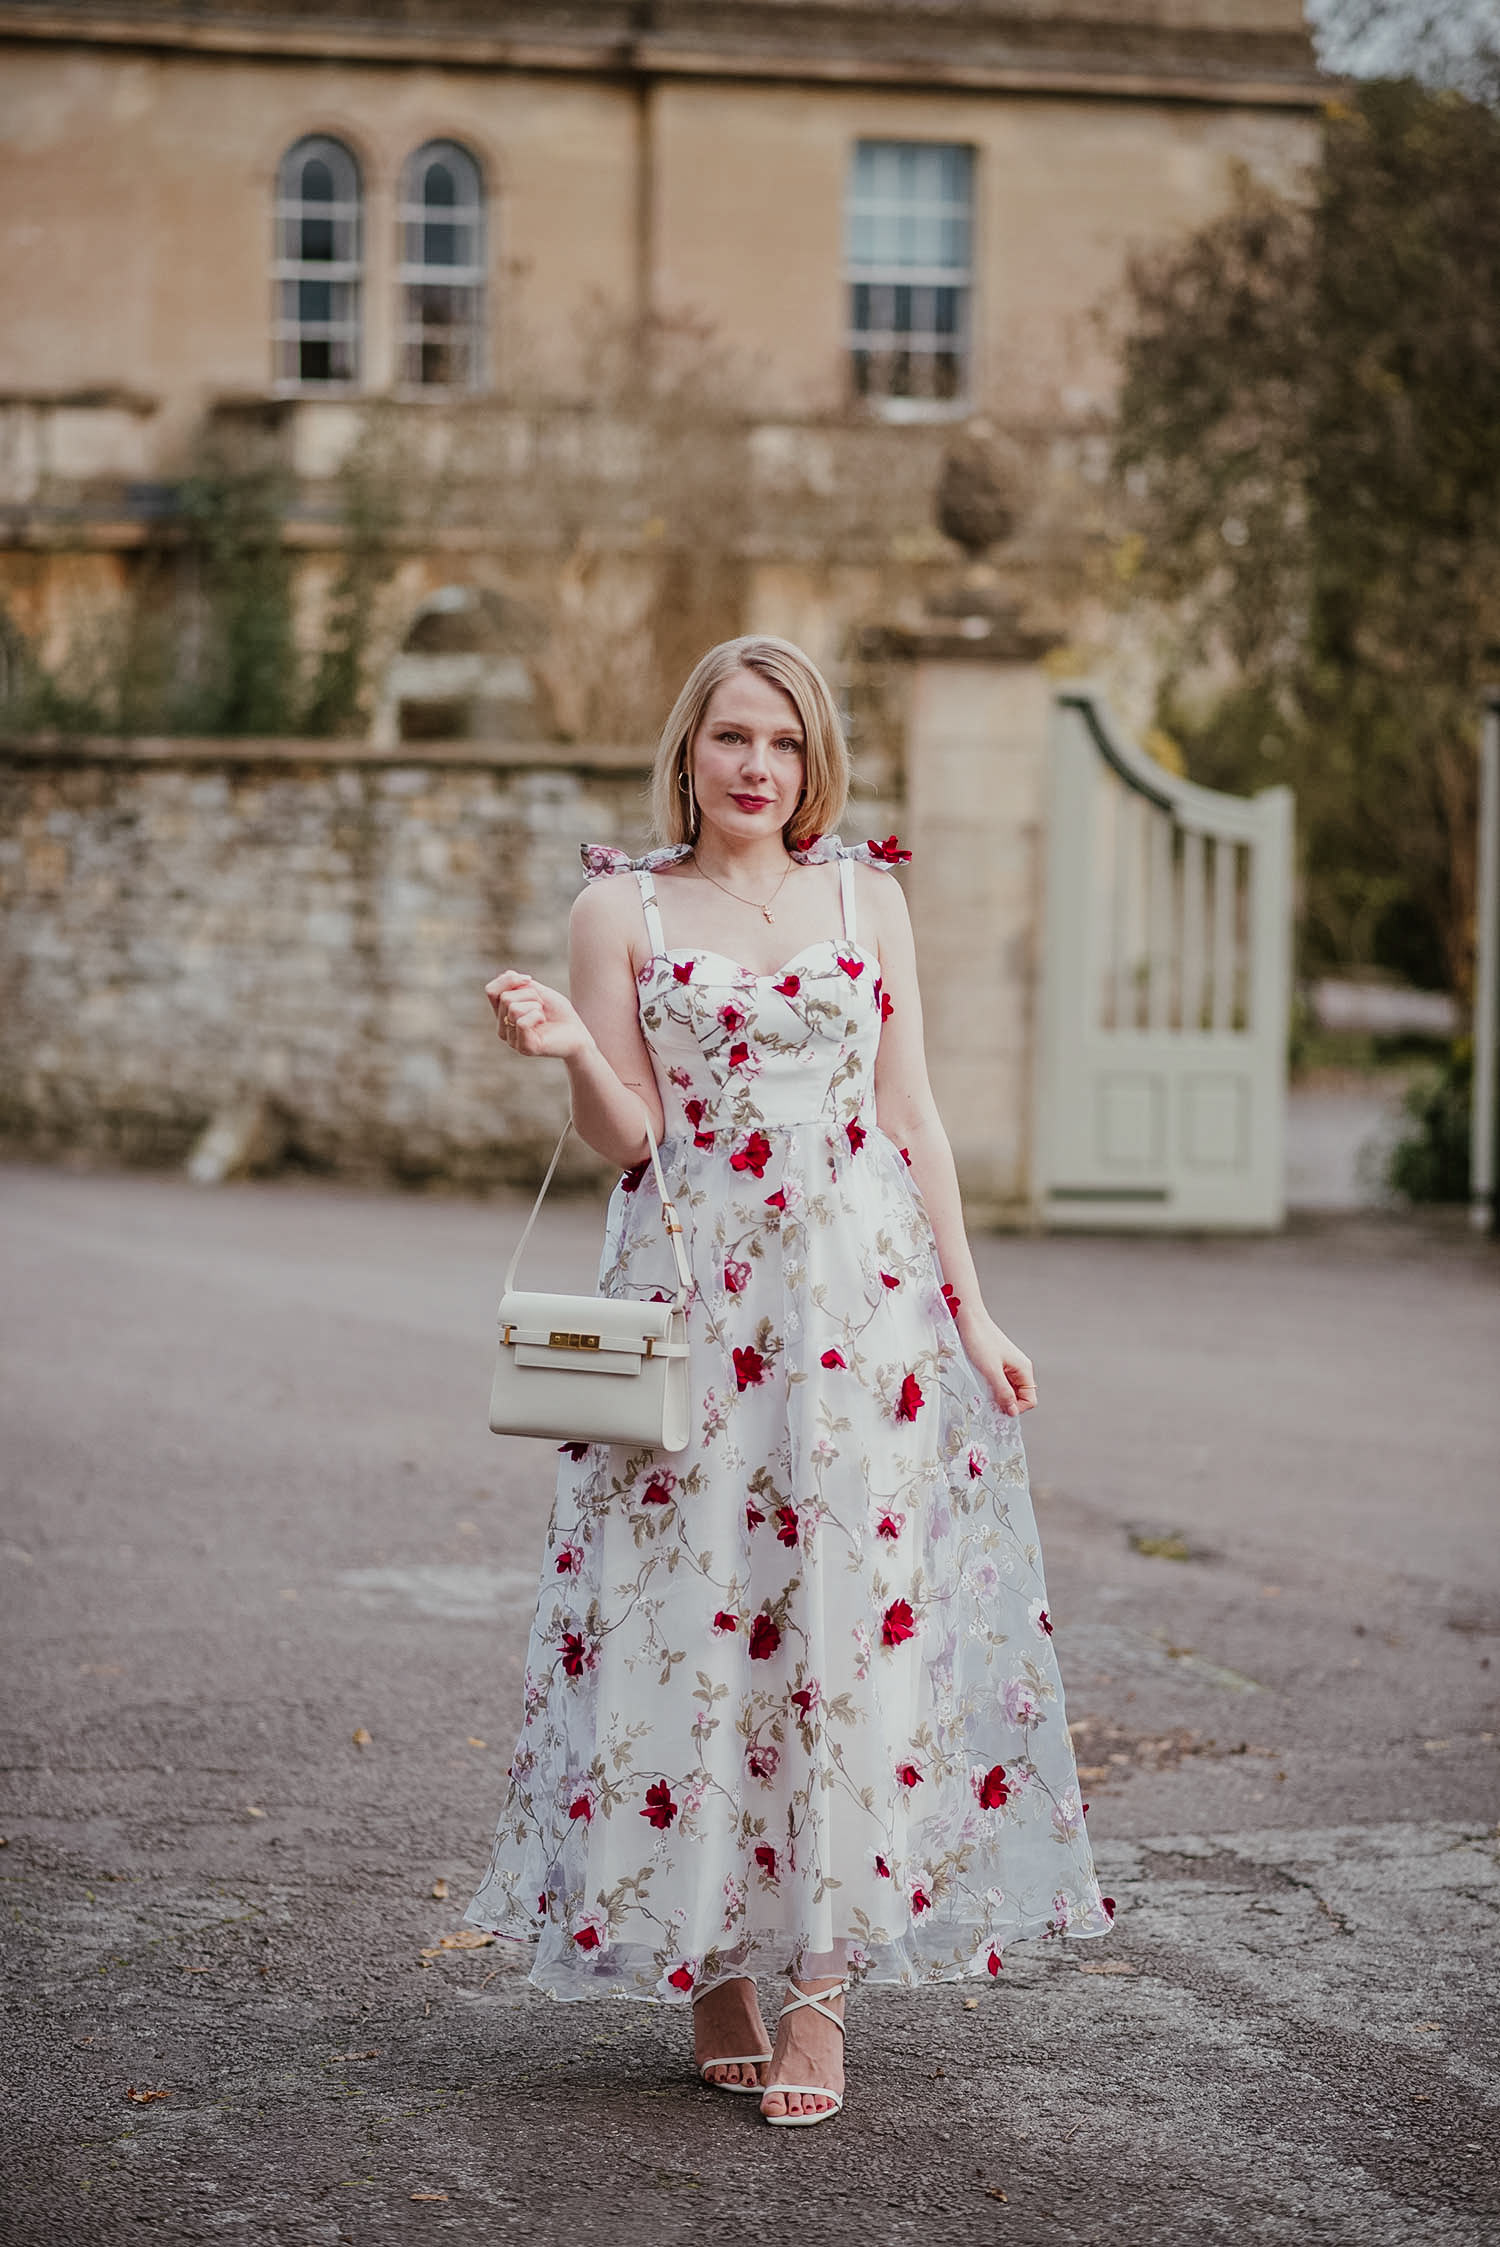 Styling Two Fairytale Princess Dresses From AW Bridal – FORD LA FEMME